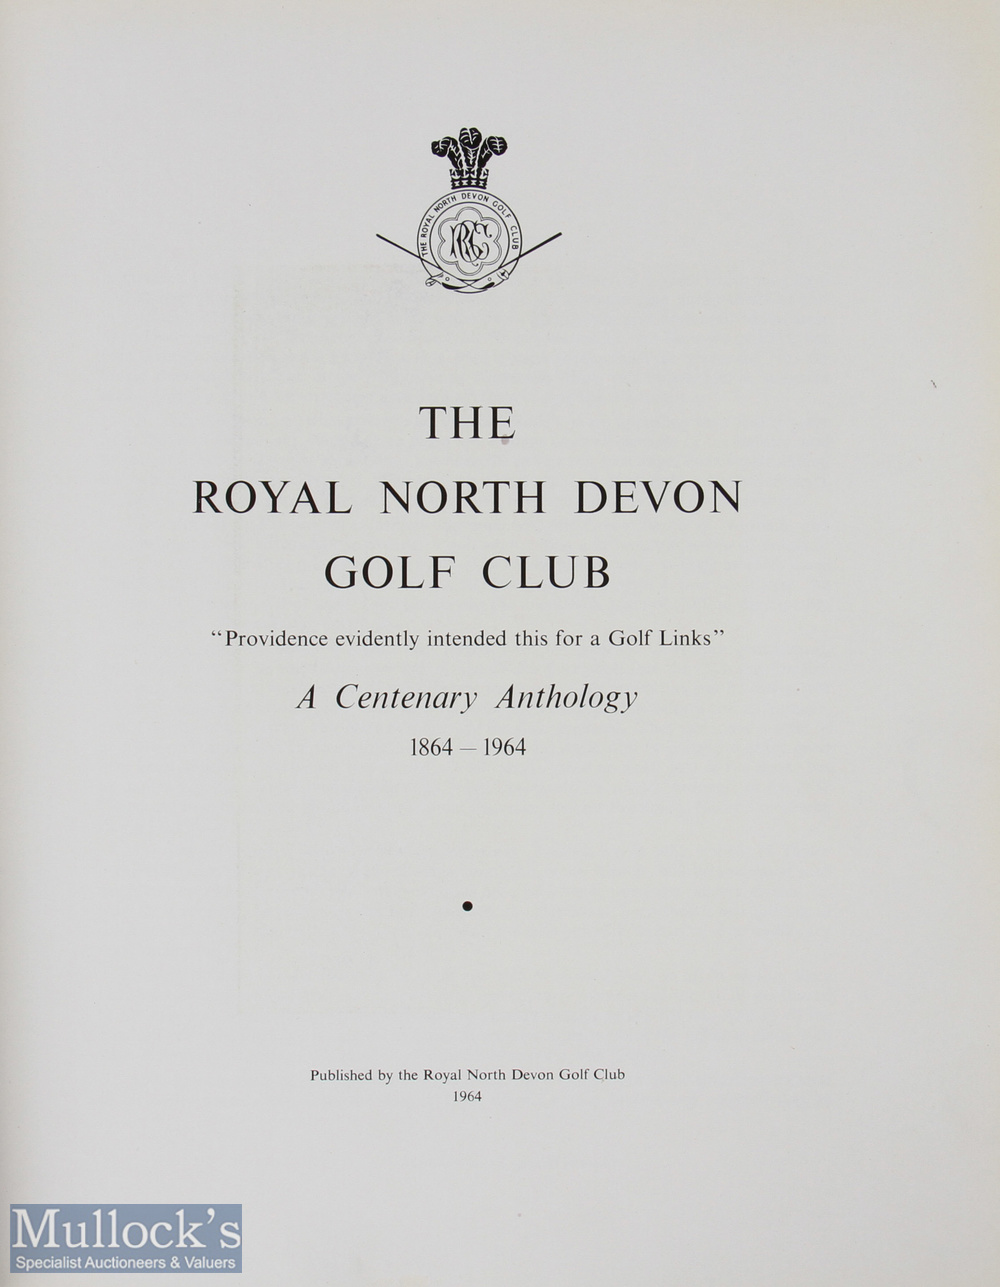 Royal North Devon Golf Club History signed - "A Centenary Anthology 1864-1964" published privately - Image 3 of 3